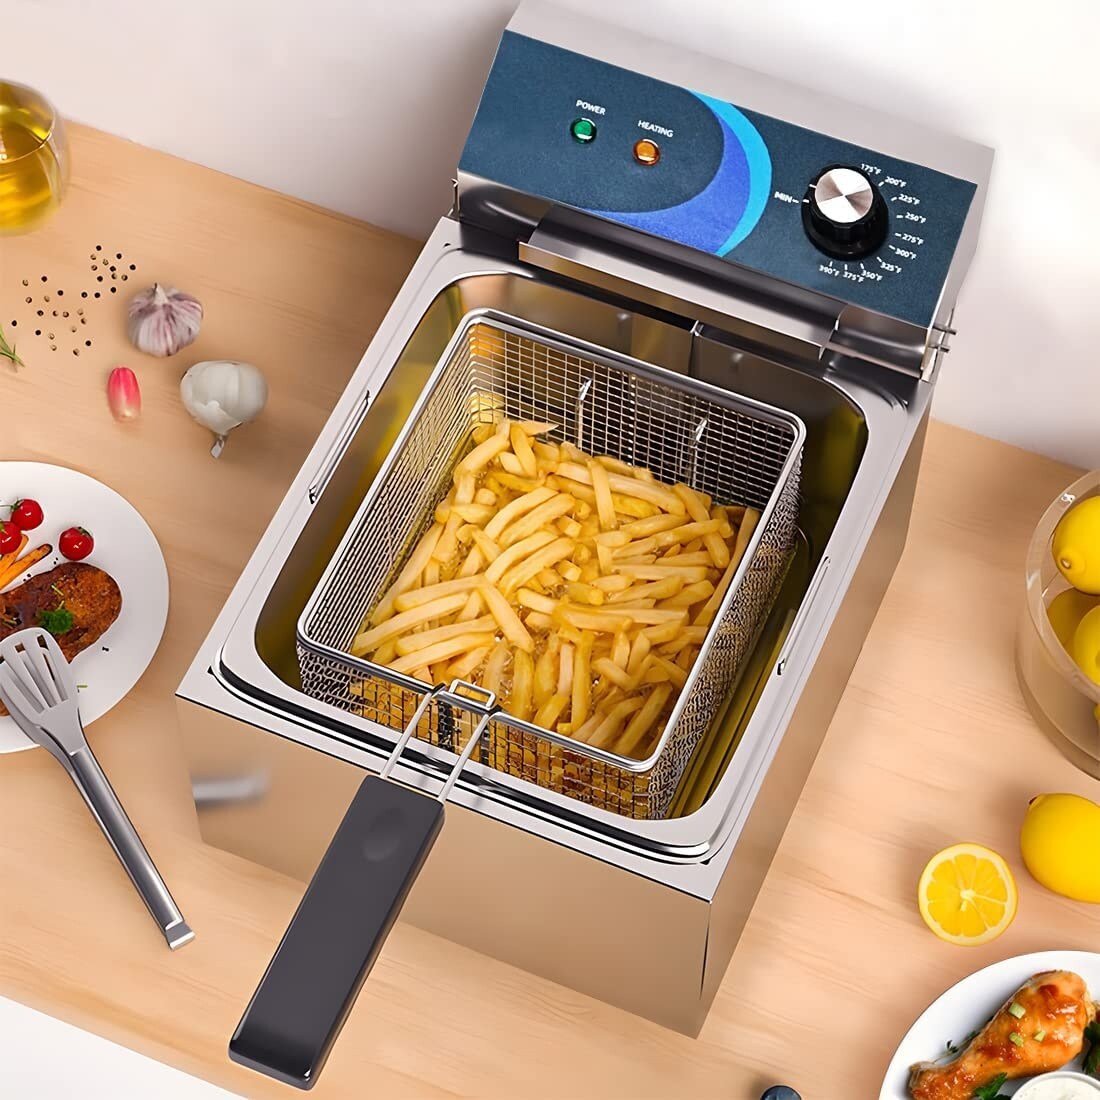 https://ak1.ostkcdn.com/images/products/is/images/direct/c8cf0cafcb688af4a5068757c8db6cf77c117191/Electric-Deep-Fryer%2C-Stainless-Steel-Deep-Fryer-with-Basket-%26amp%3B-Lid-Capacity-10L-Electric-Countertop-Fryers.jpg